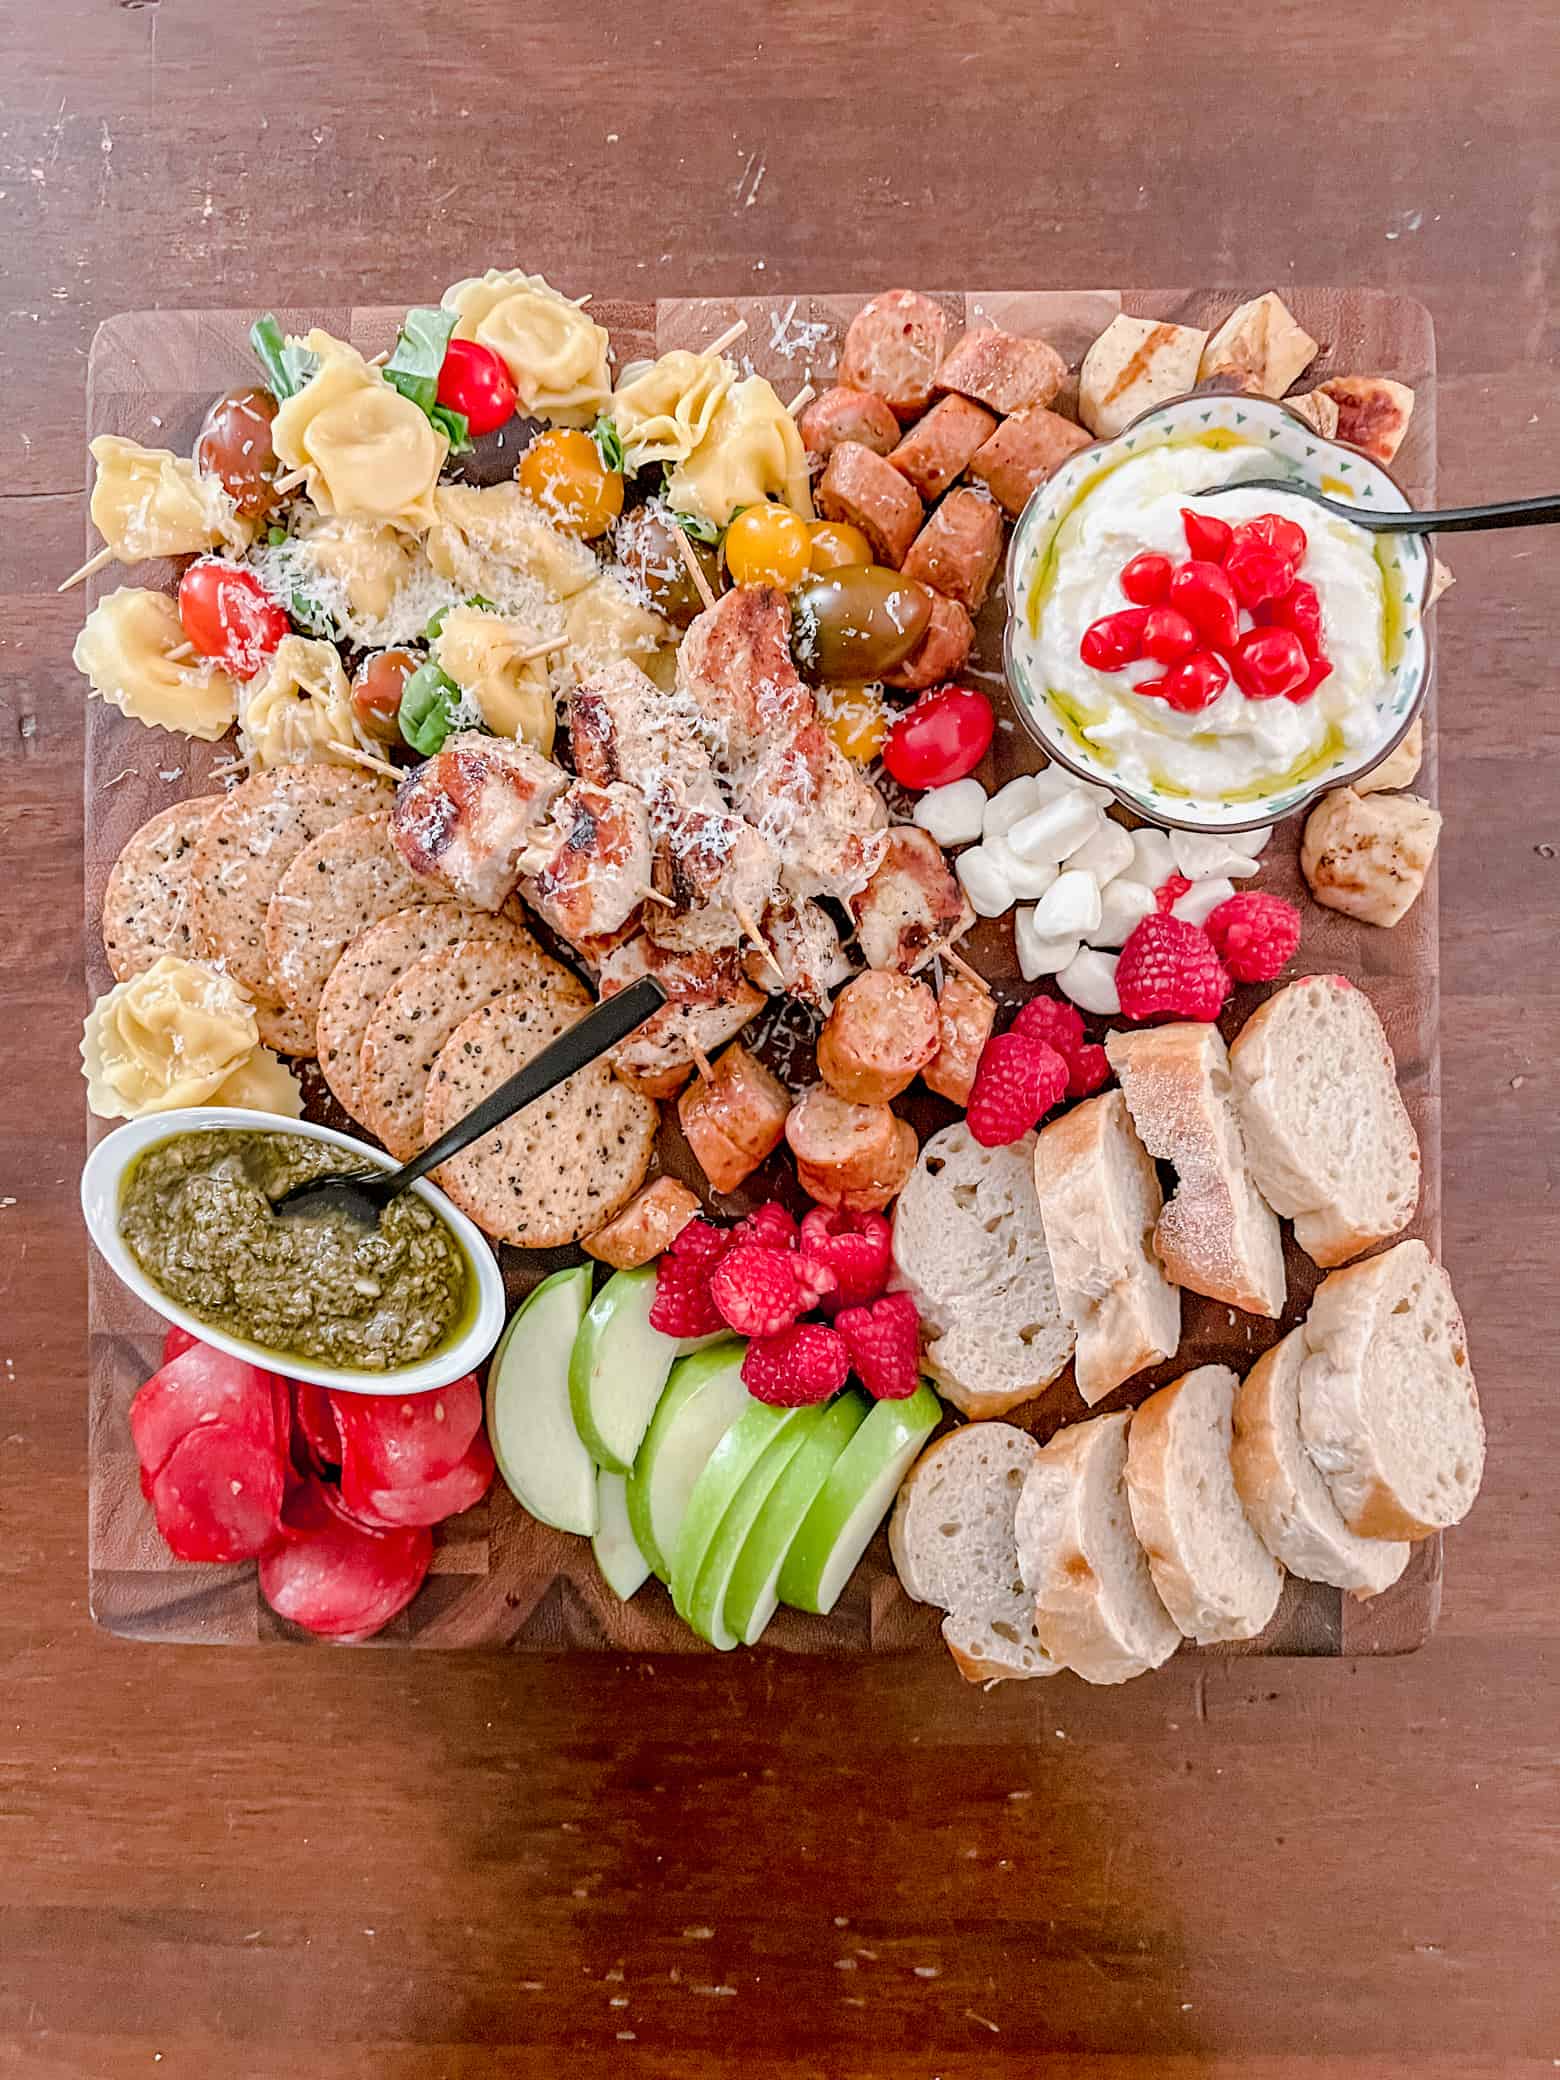 Overhead view of a charcuterie board that does not contain pork.